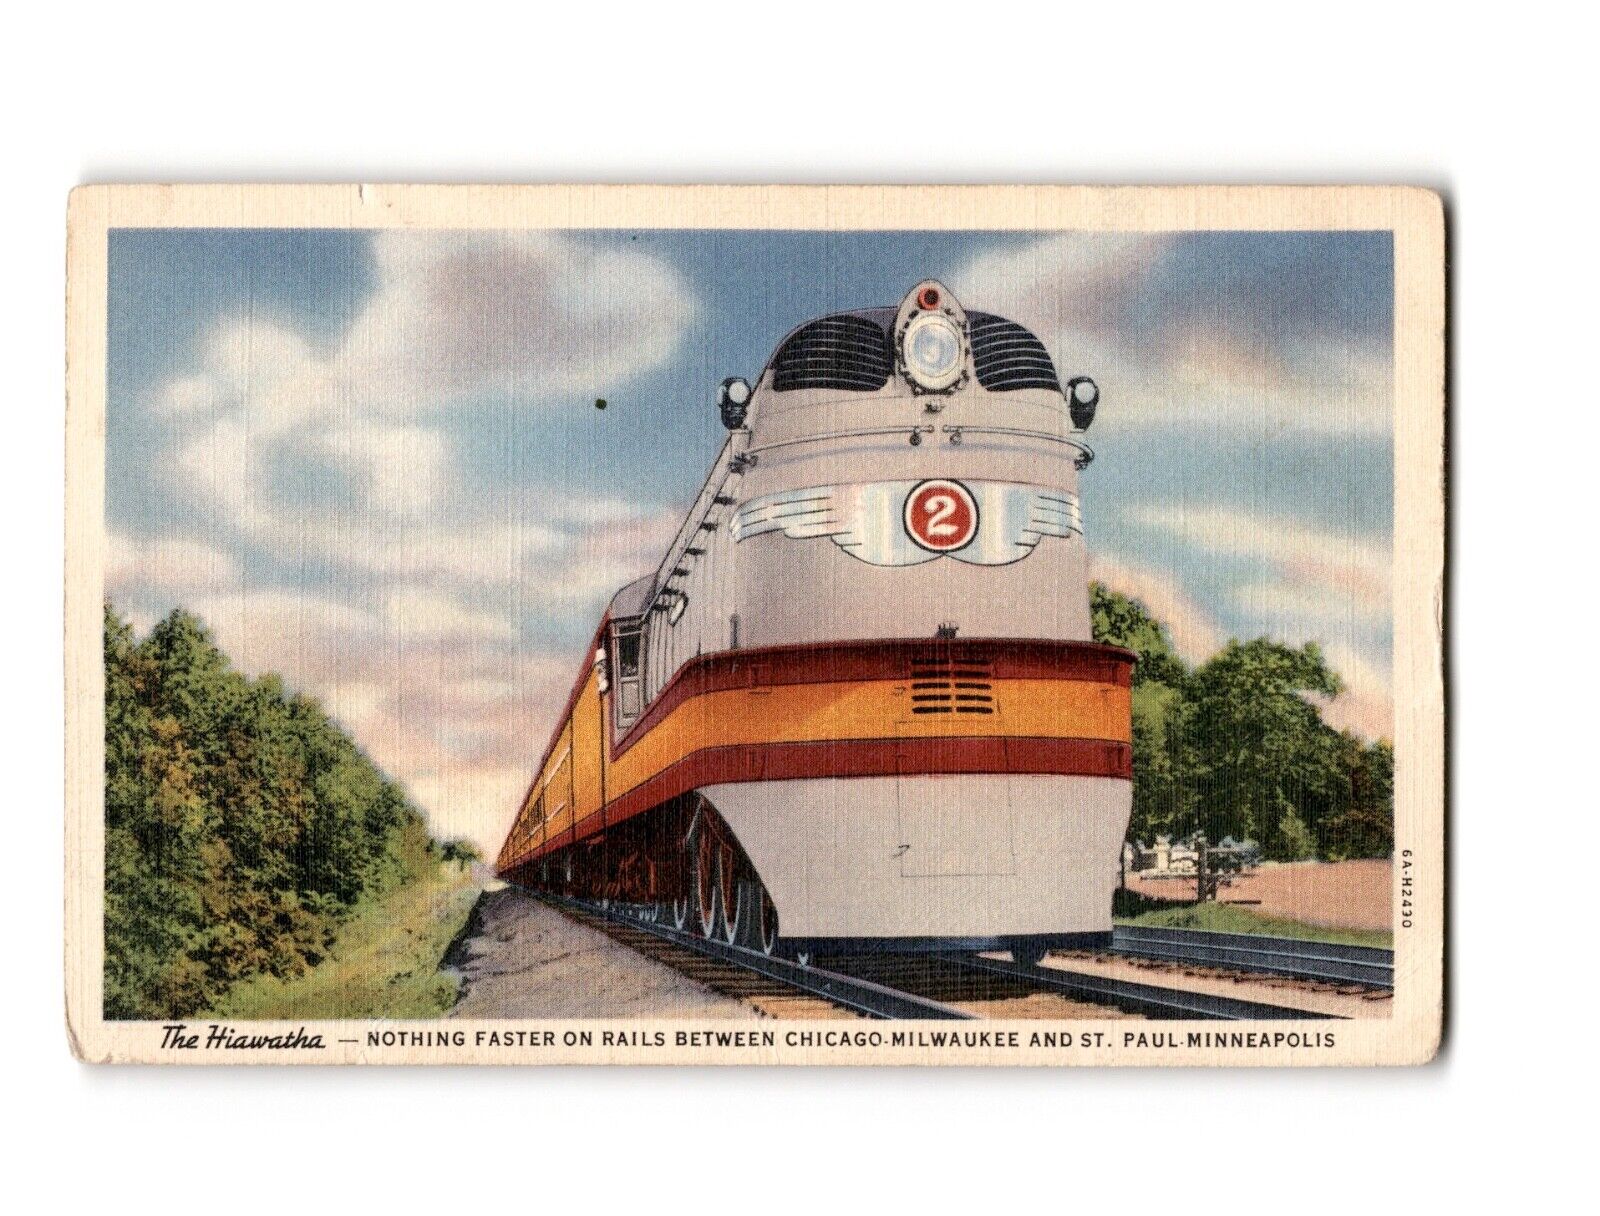 The Hiawatha - NOTHING FASTER ON RAILS BETWEEN CHICAGO-MIL Linen Postcard